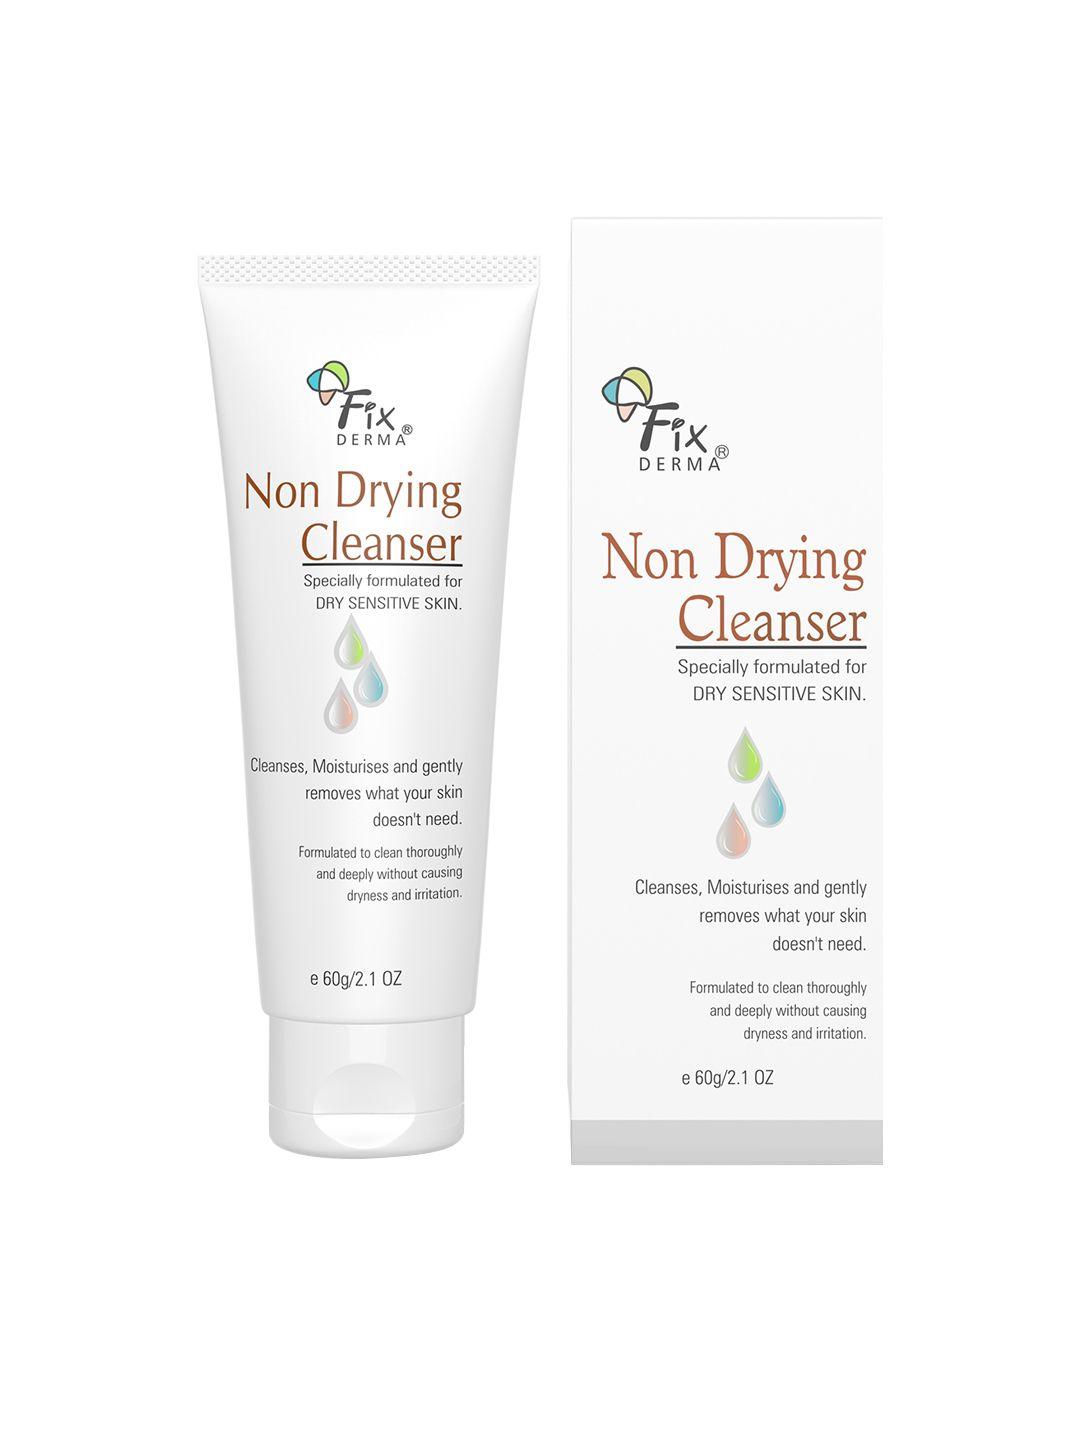 fixderma soap-free ph balanced non drying face cleanser for pore-refining - 60g